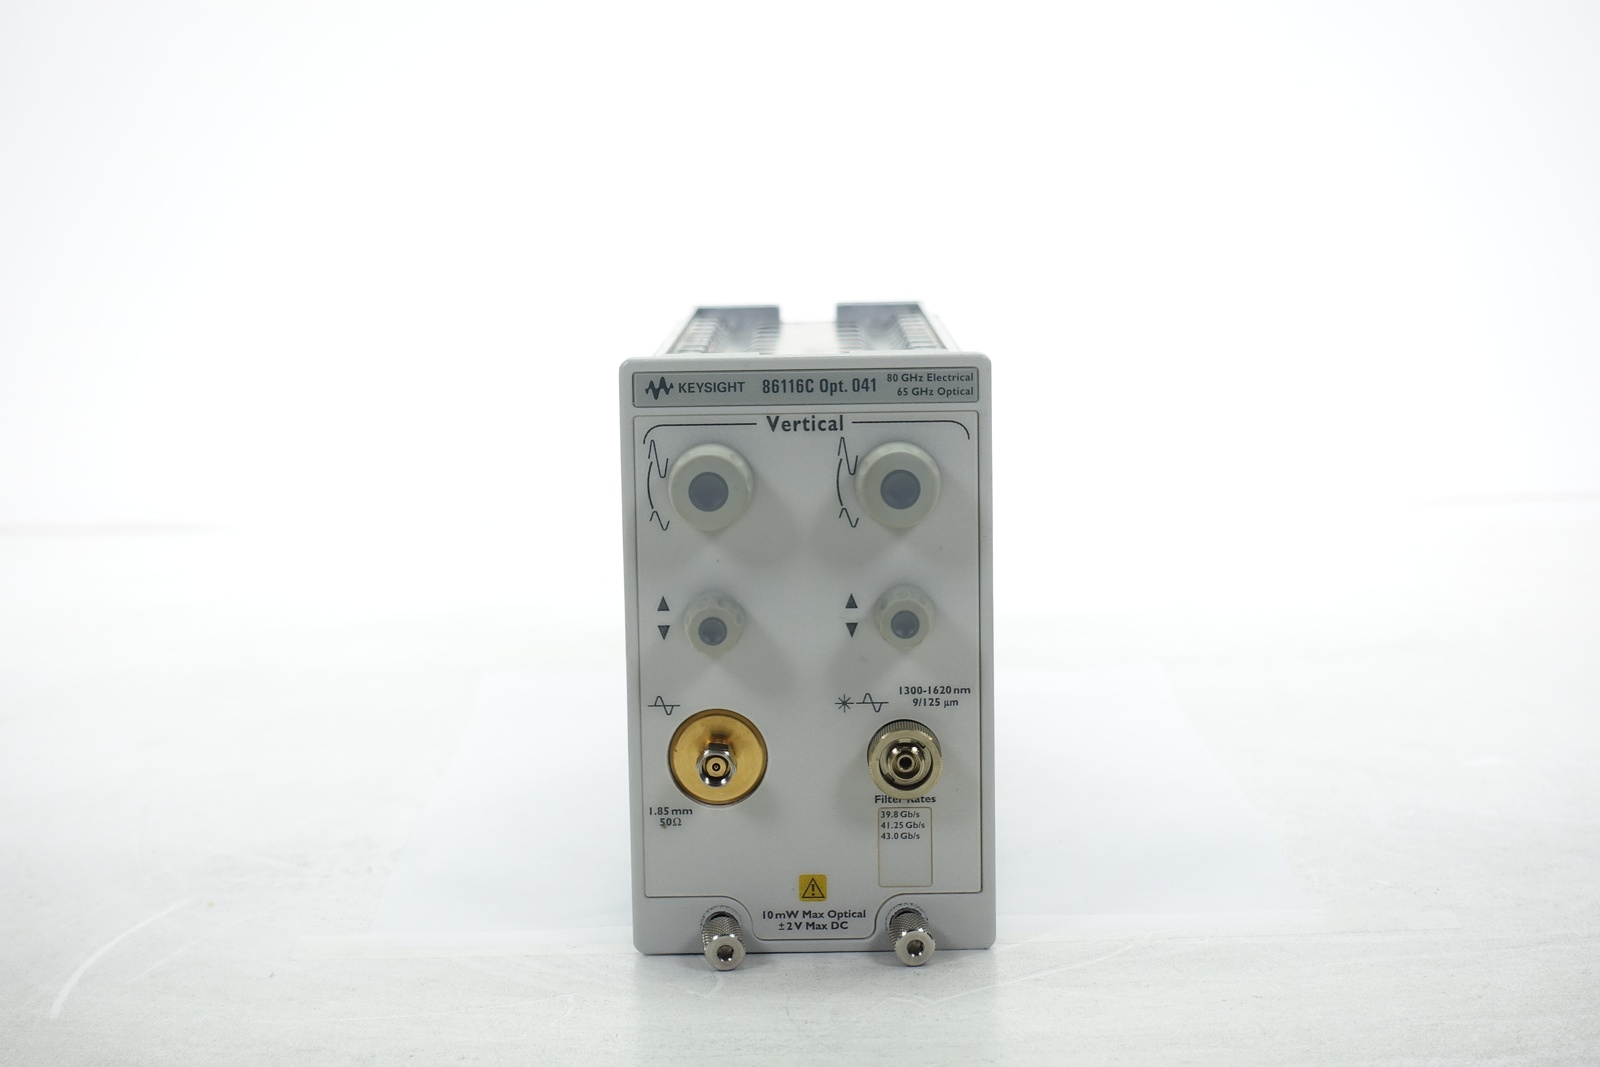 Keysight 86116C-041 65 GHz Optical / 80 GHz Electrical Module / 39.8/41.25/43.0 Gb/s Reference Receiver